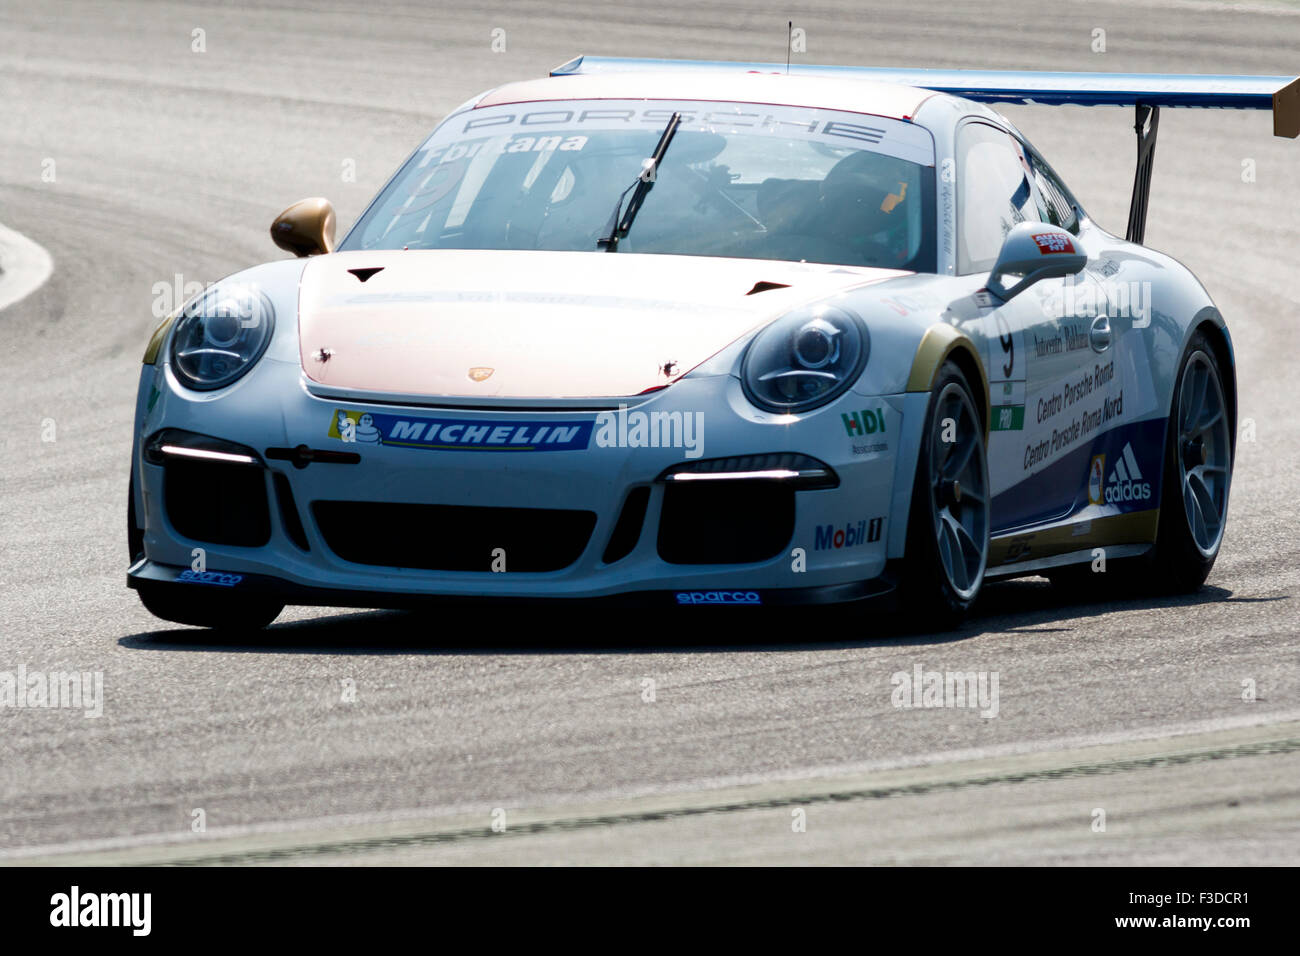 Monza, Italy - May 30, 2015: Porsche 911 GT3 Cup of Ghinzani Arco Motorsport team, driven  by Andrea Fontana Stock Photo